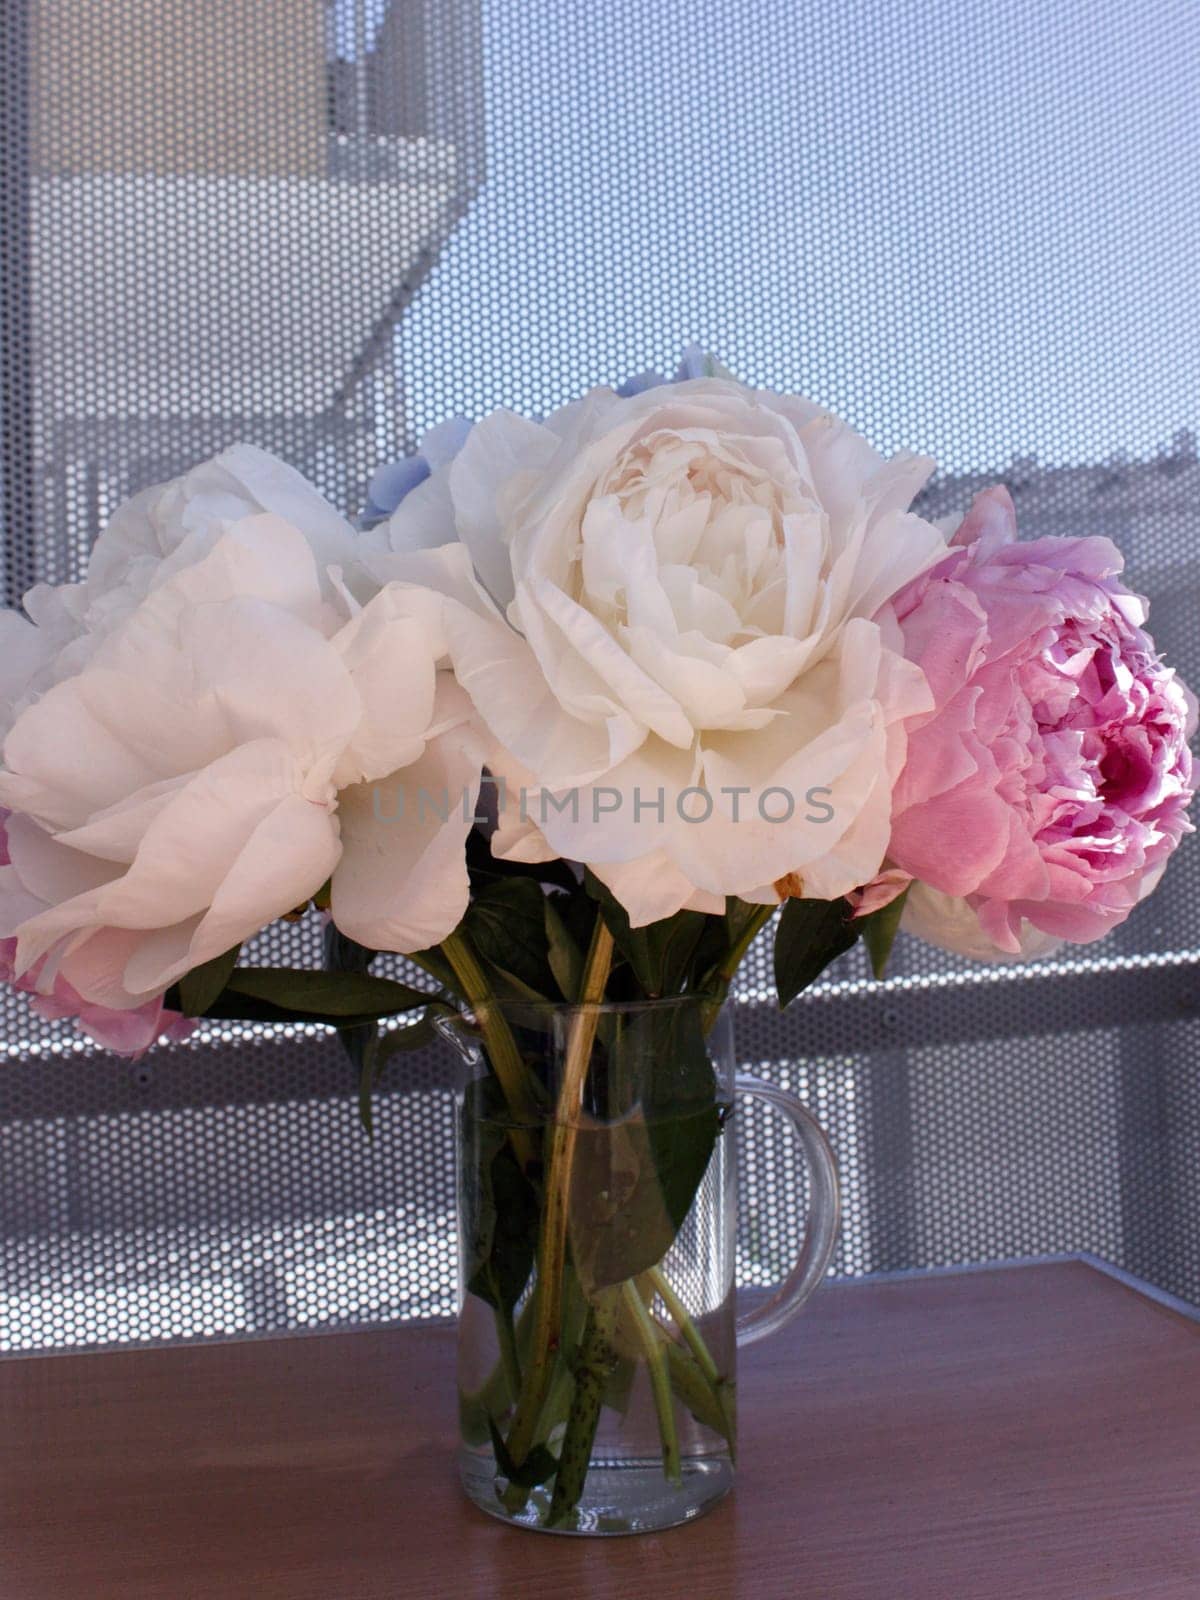 A bouquet of blooming white and pink peonies of delicate color. High quality photo